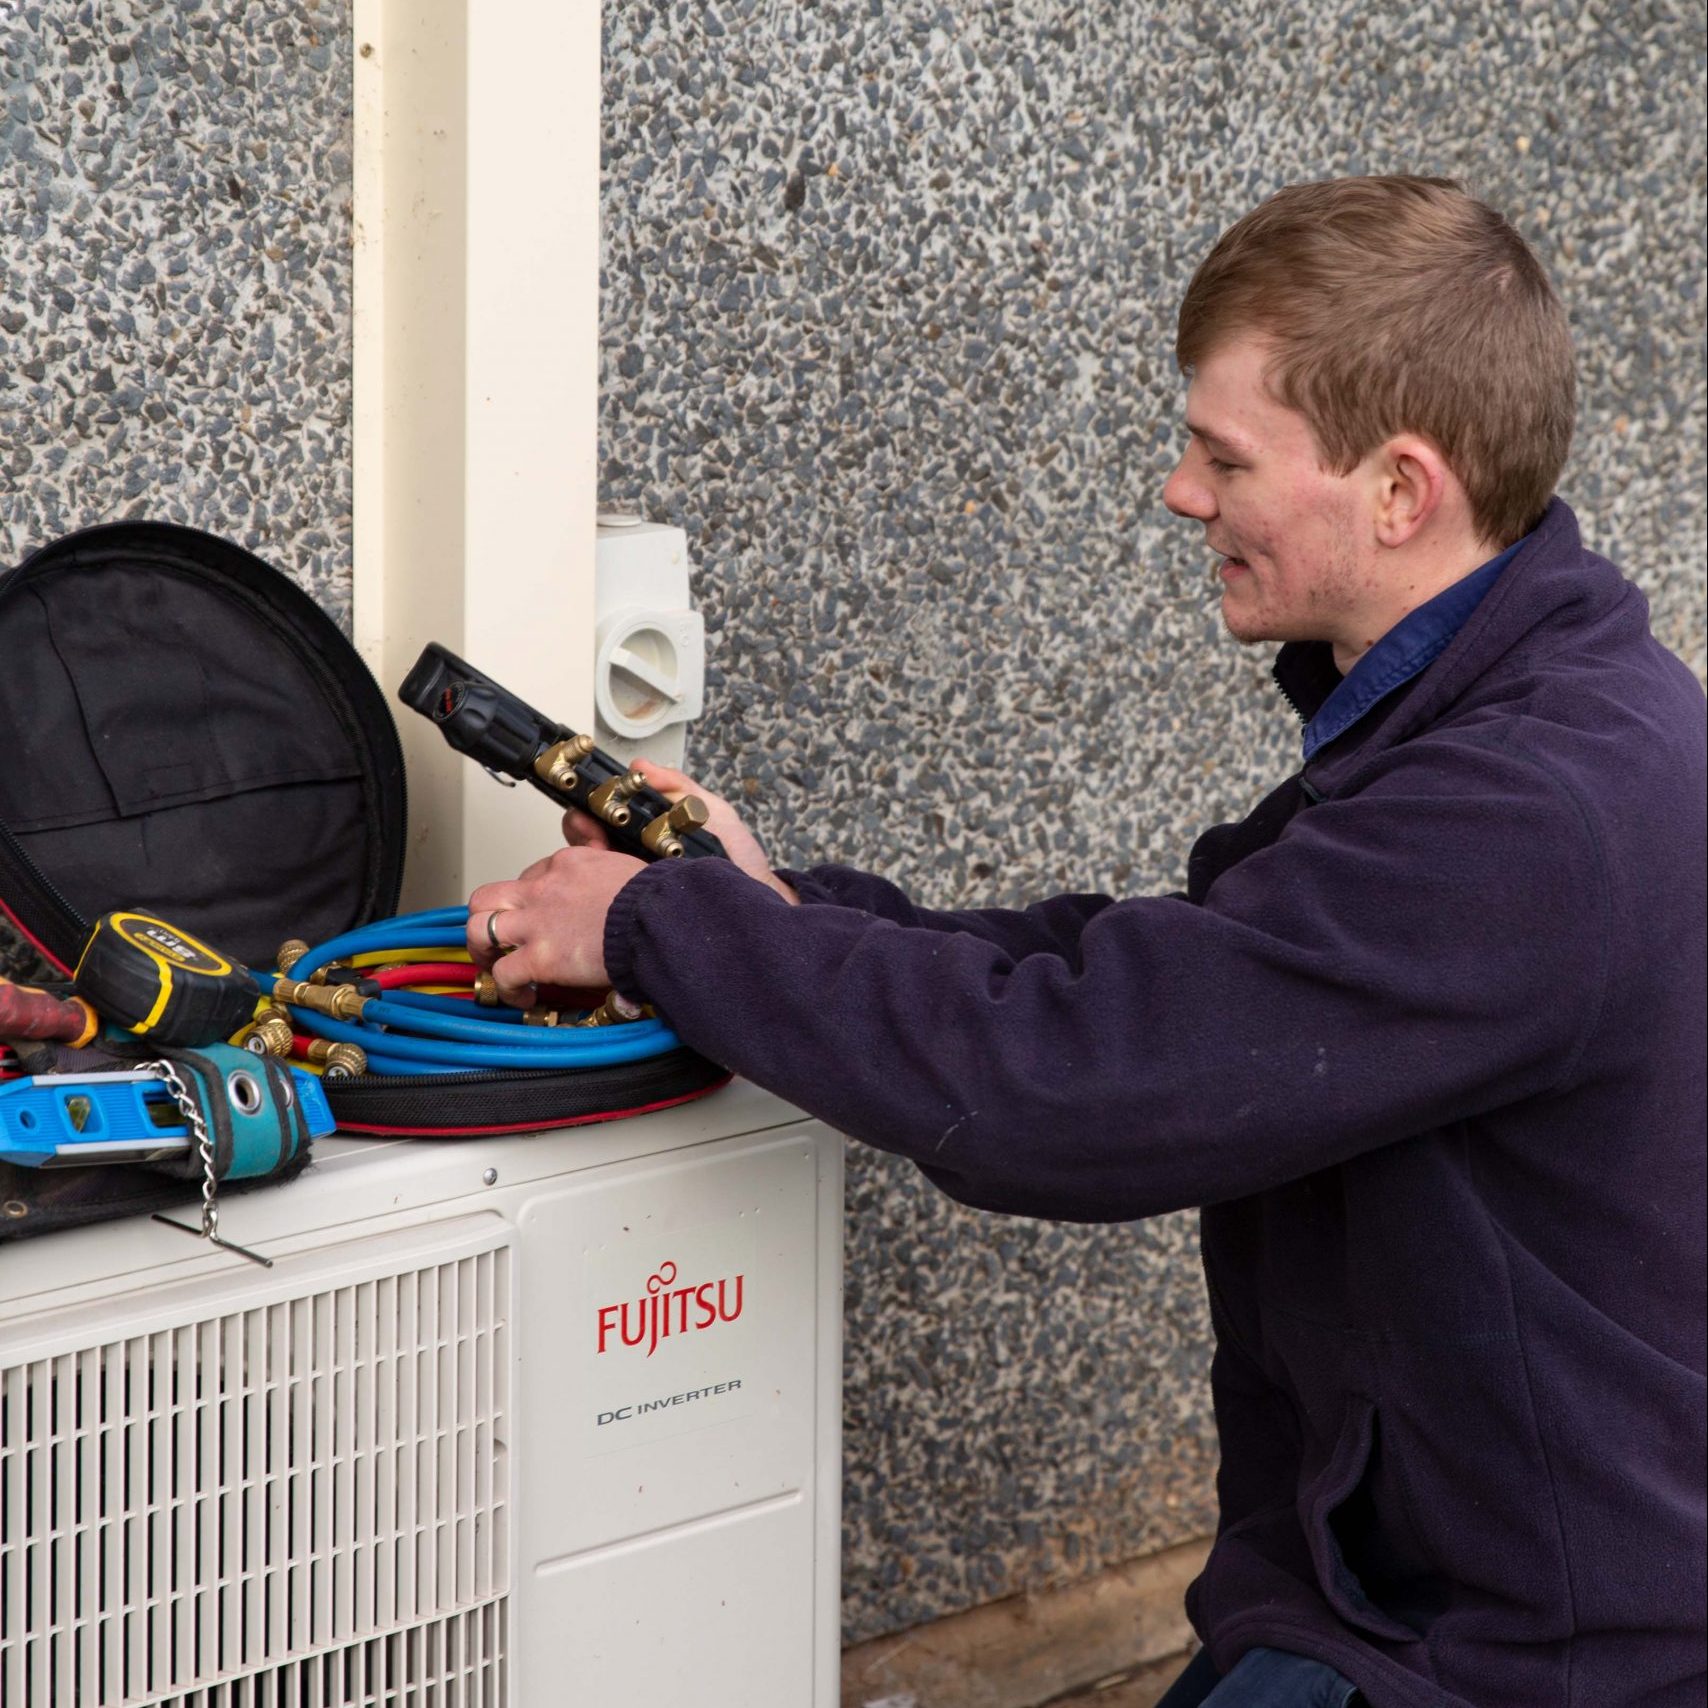 Orange Electrical Works technician inspecting a Fujitsu air conditioner